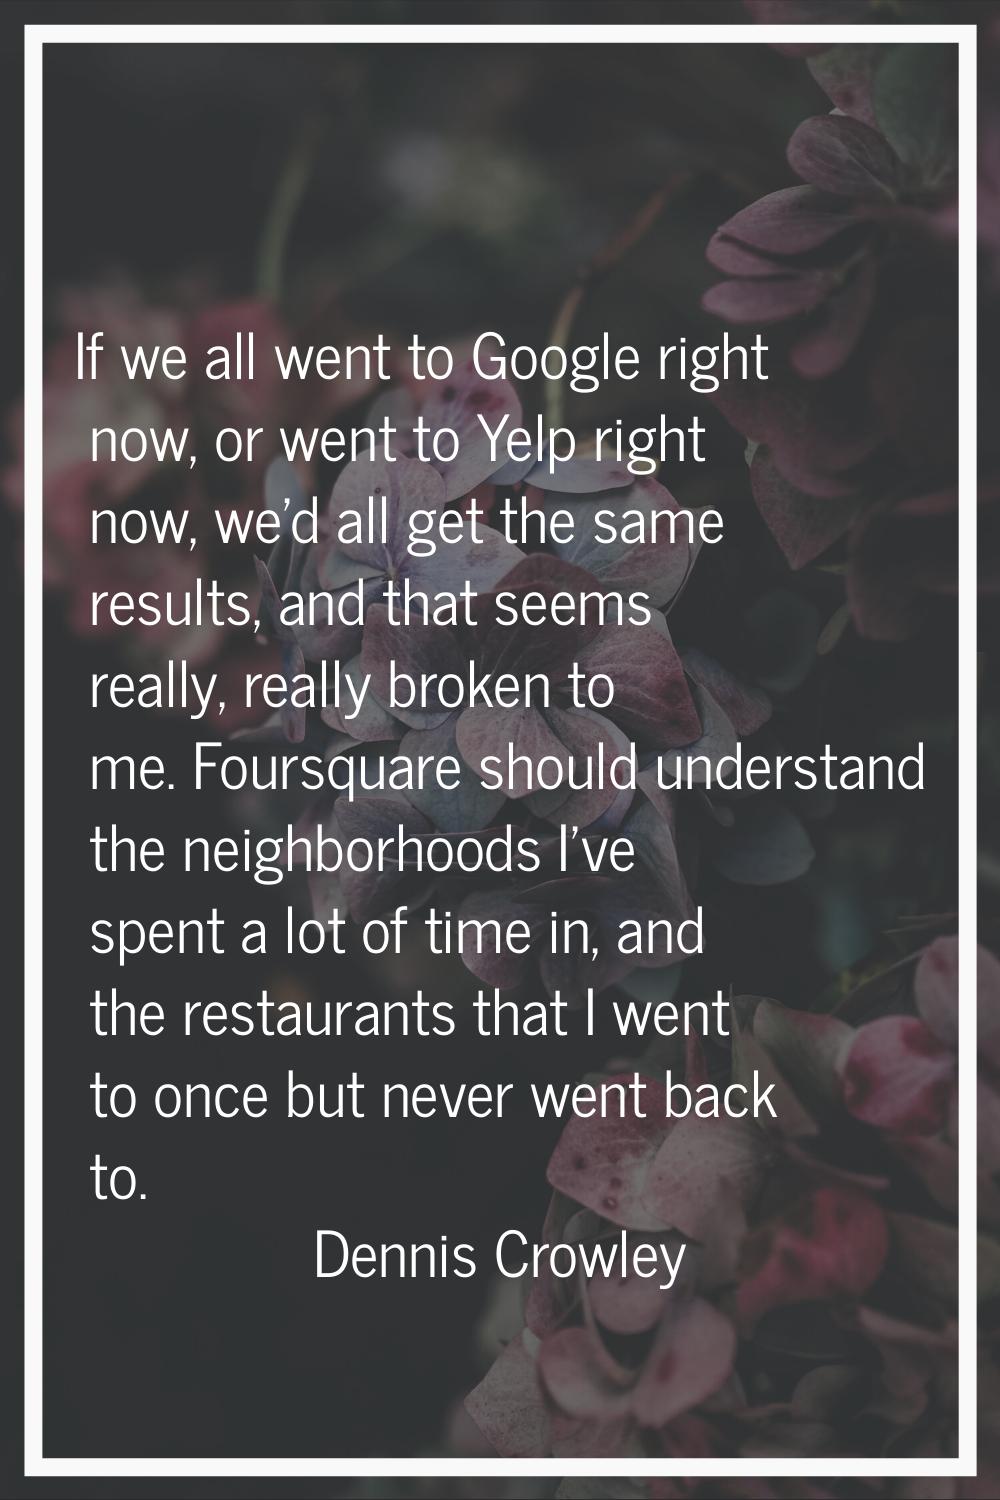 If we all went to Google right now, or went to Yelp right now, we'd all get the same results, and t